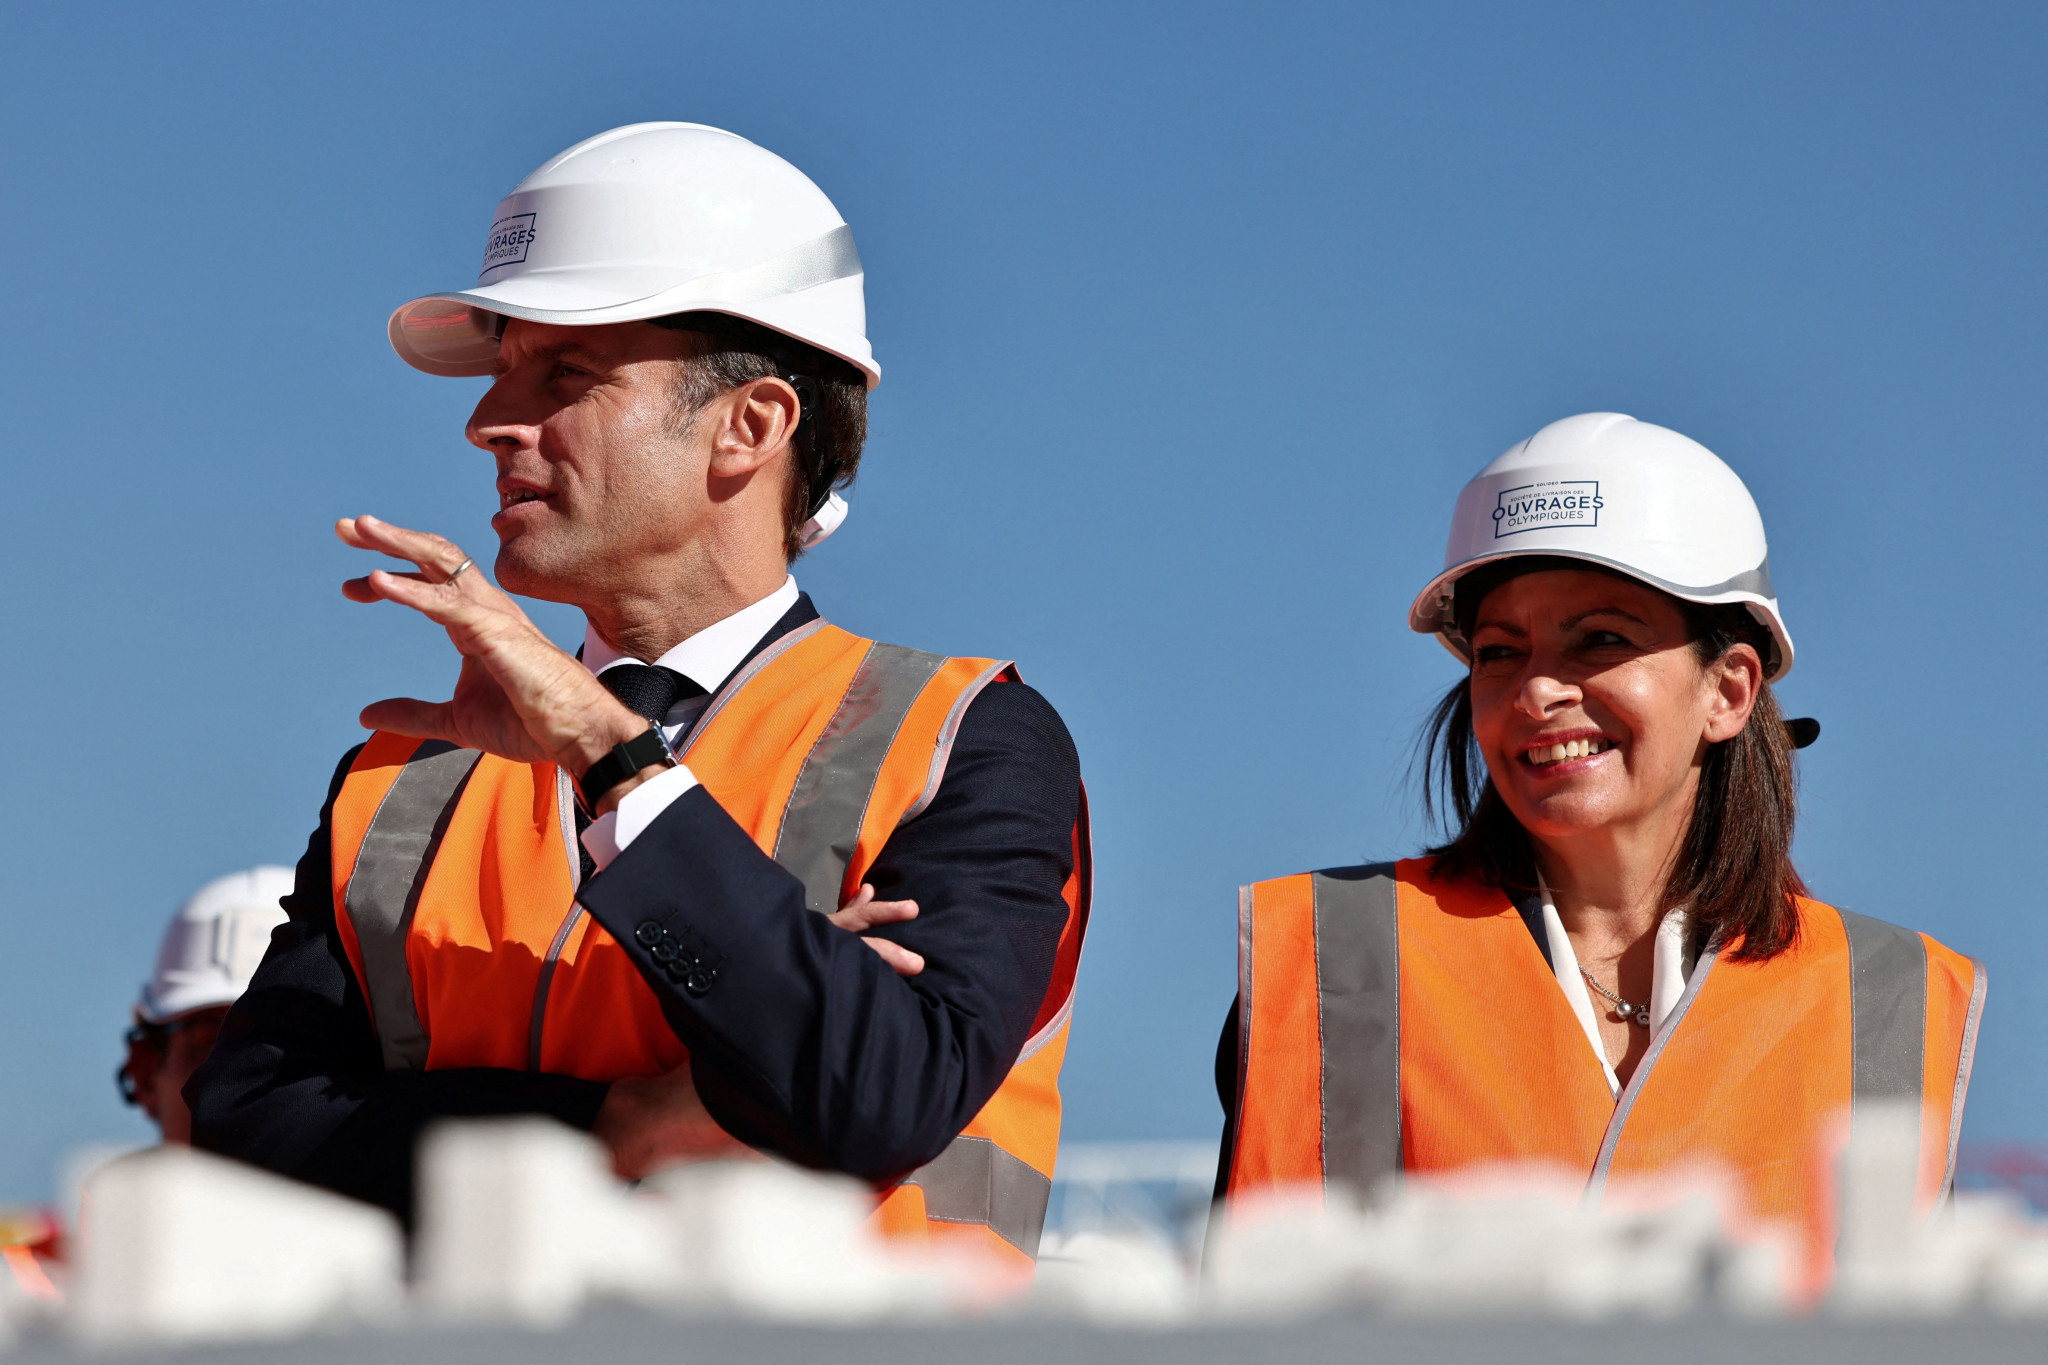 Paris 2024 President Tony Estanguet, left, and Hidalgo visited the construction site for the Olympic Village in Saint-Ouen amid criticisms regarding investment in the legacy of the Games ©Getty Images